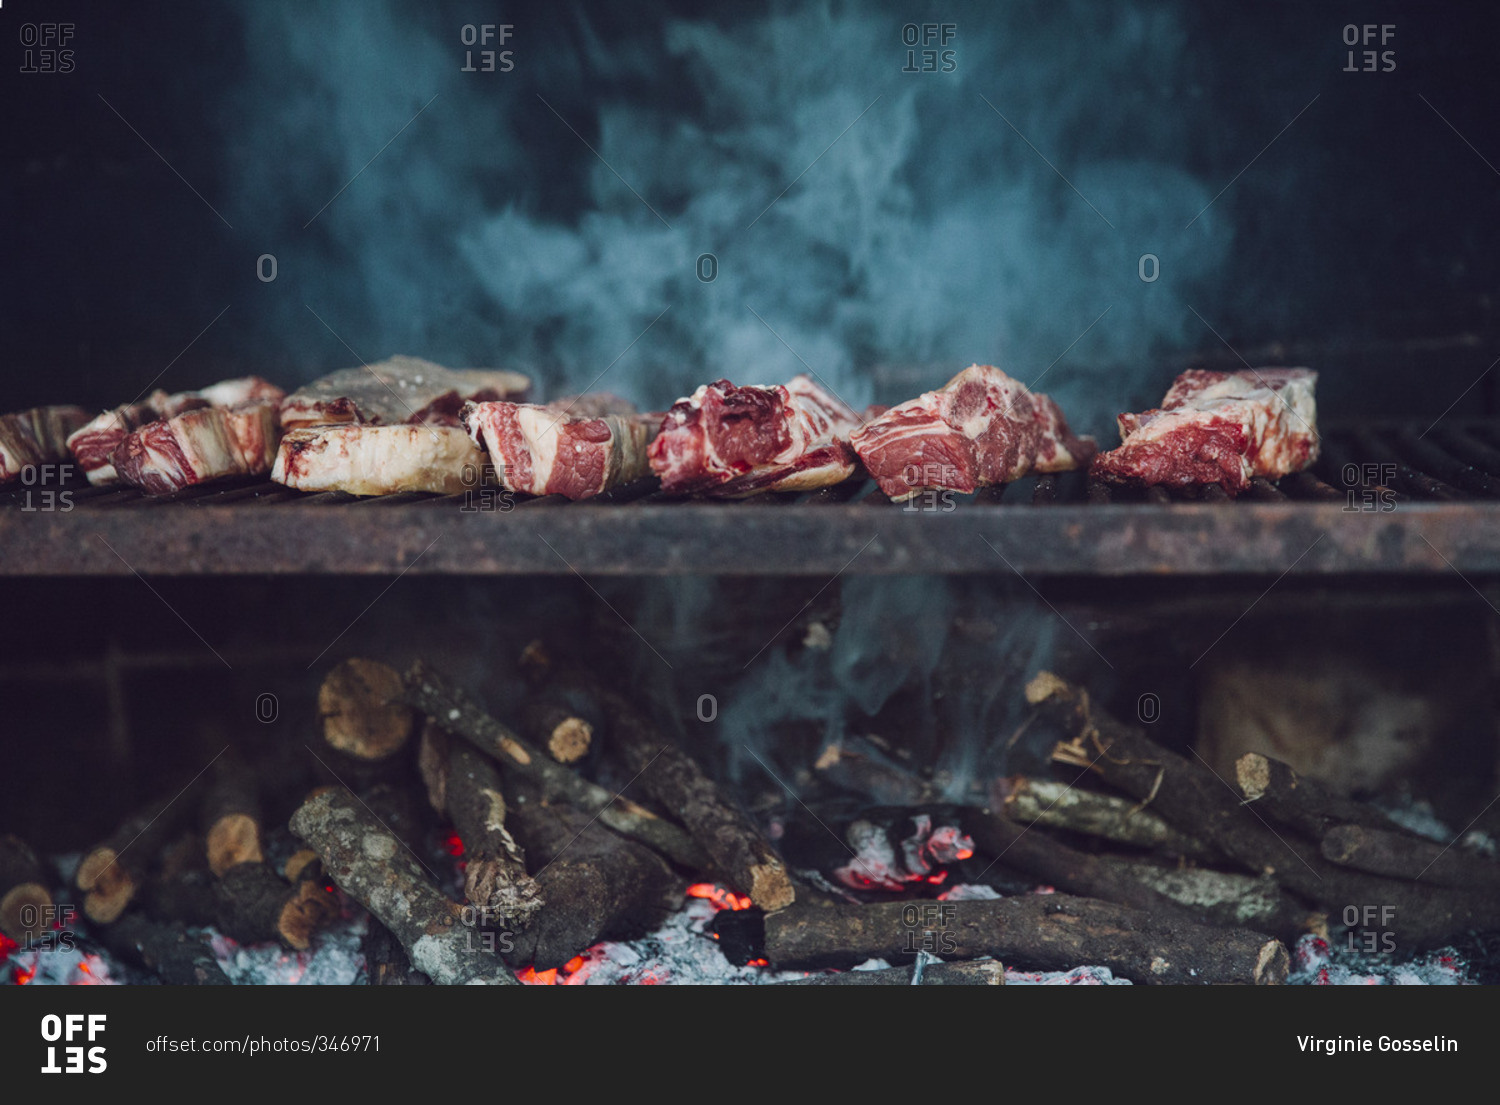 Meat cooking on a wood-fired grill